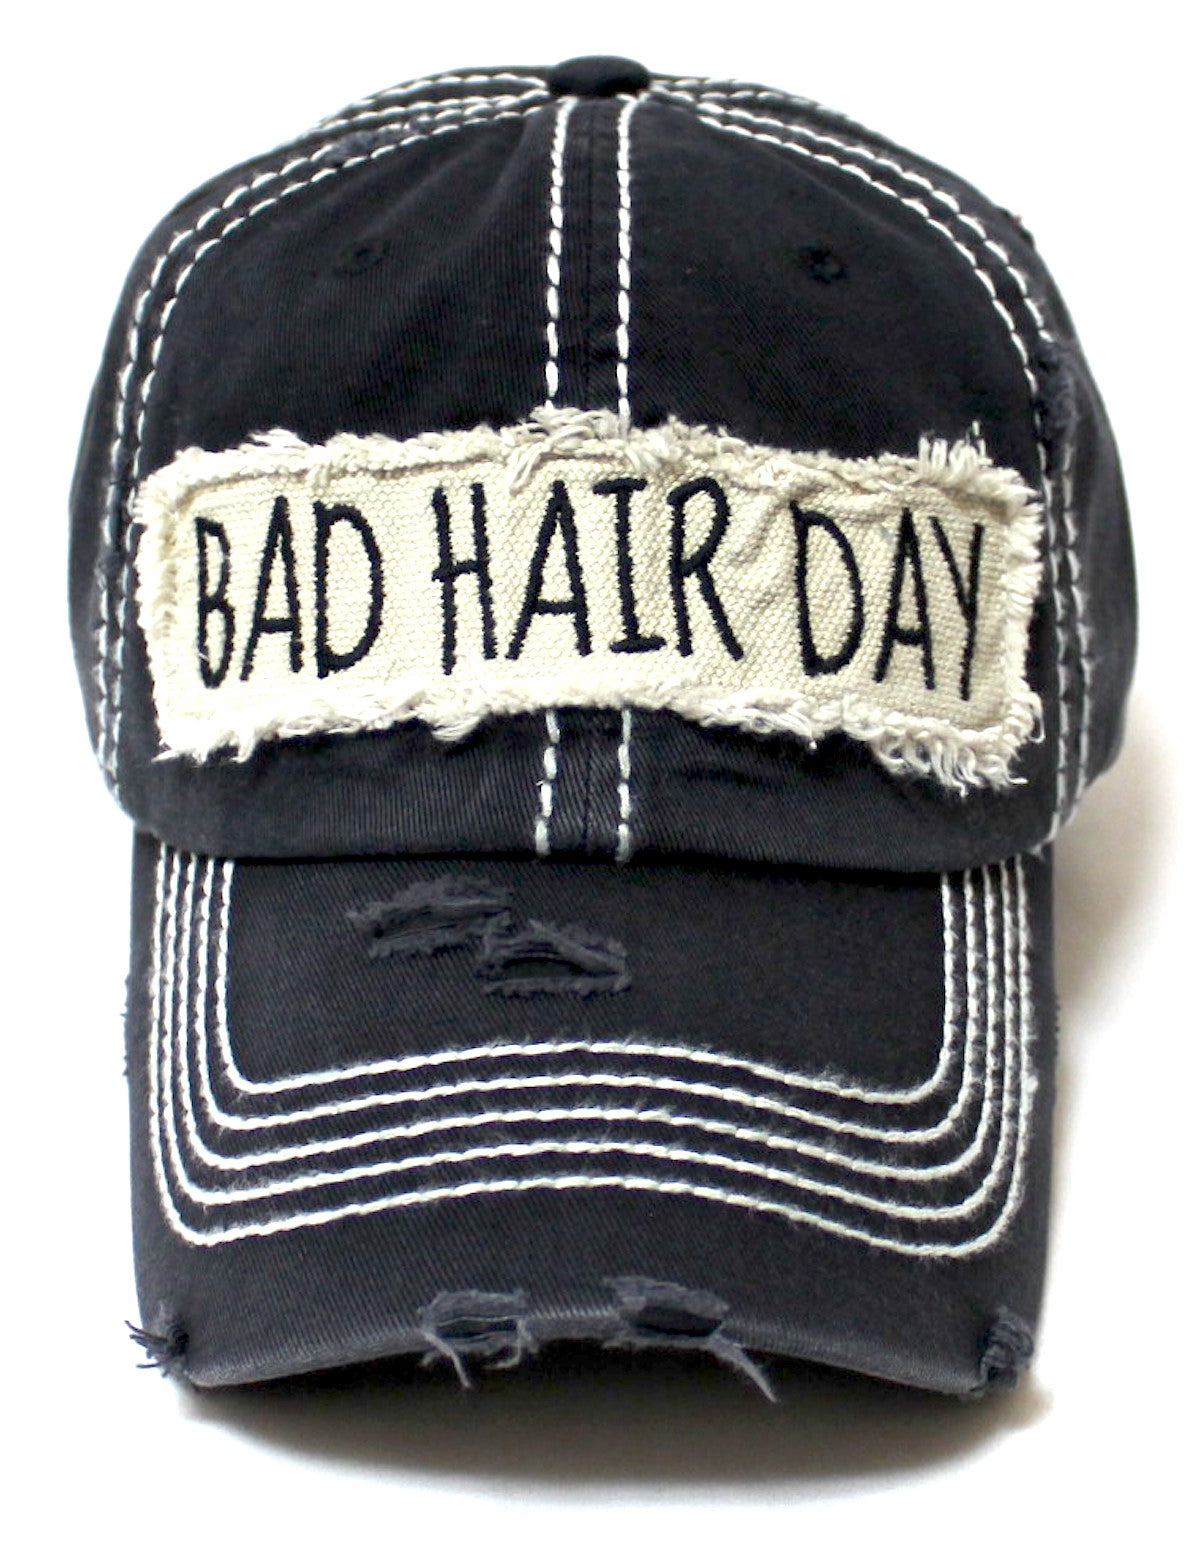 Onyx Black "BAD HAIR DAY" Embroidery Patch Baseball Cap